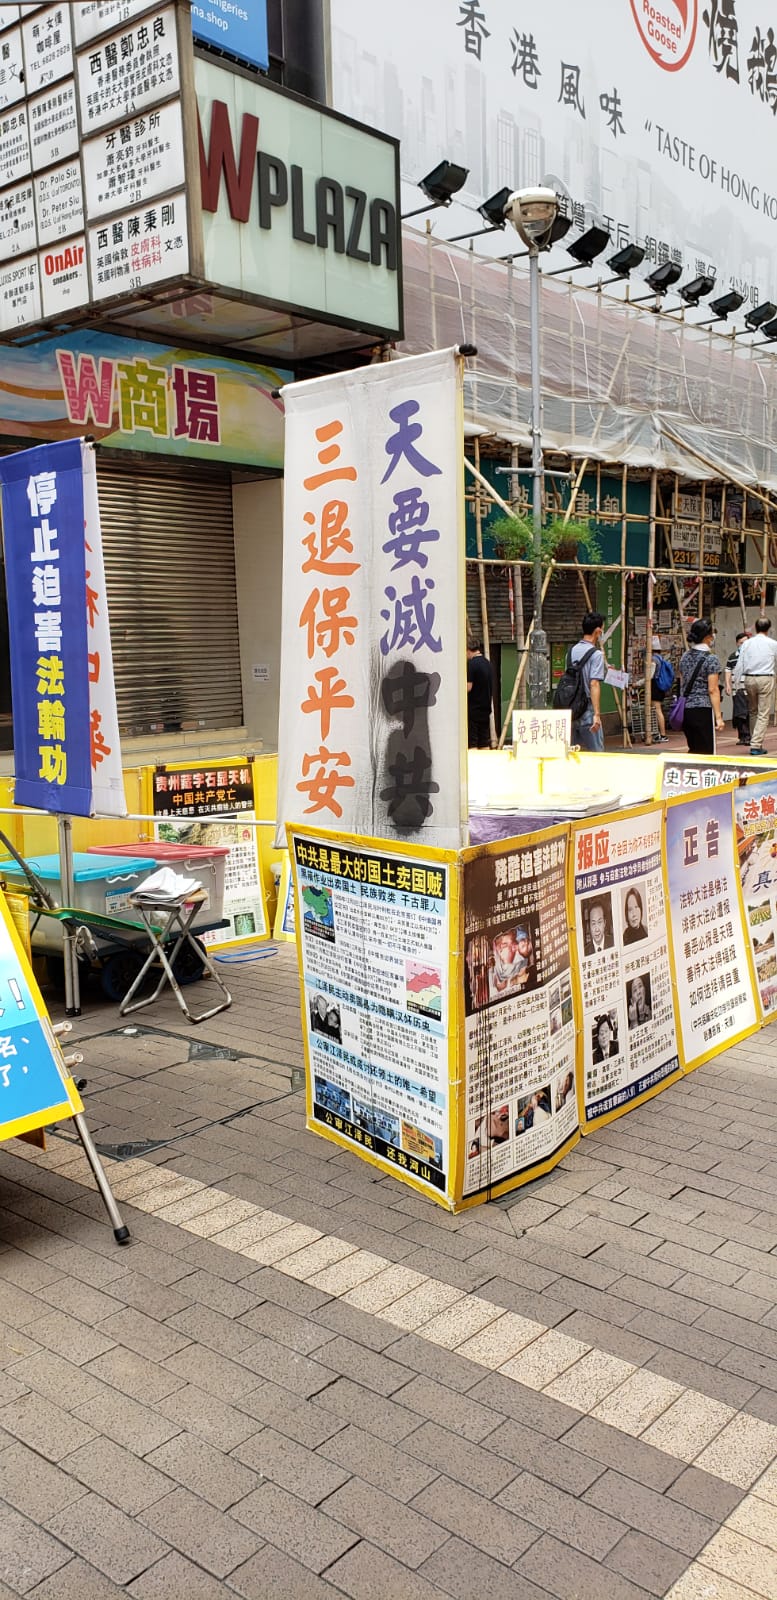 Falun Gong information booth vandalized. (The Epoch Times)